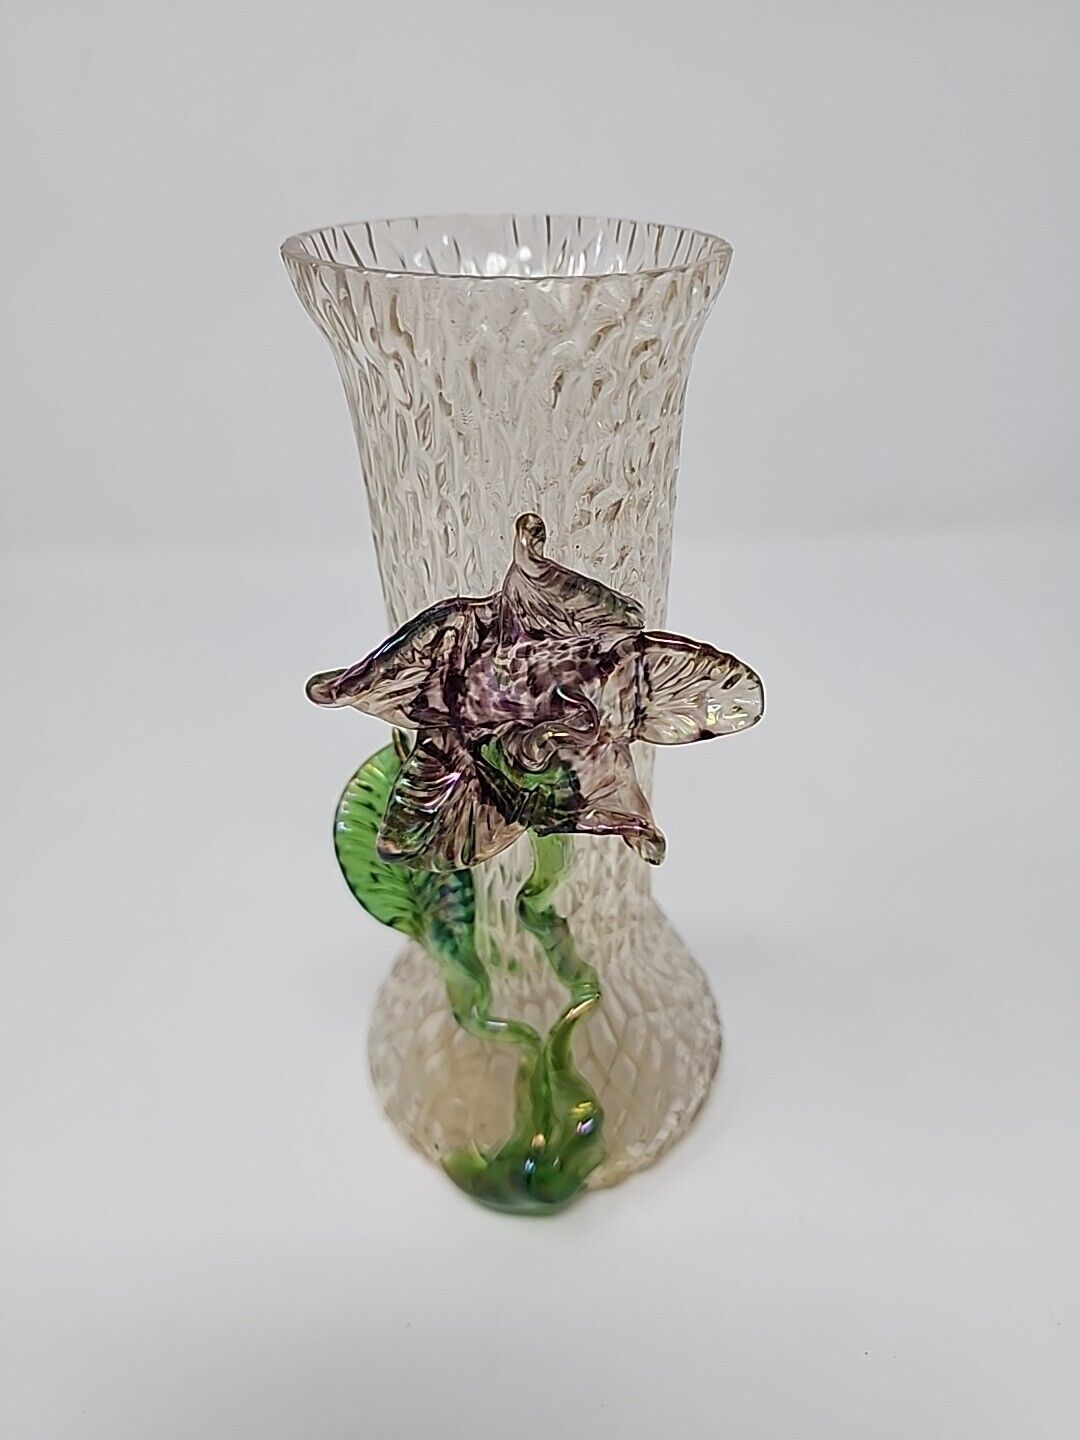 Czech Art Glass iridescent vase with purple flower on stem with leaves